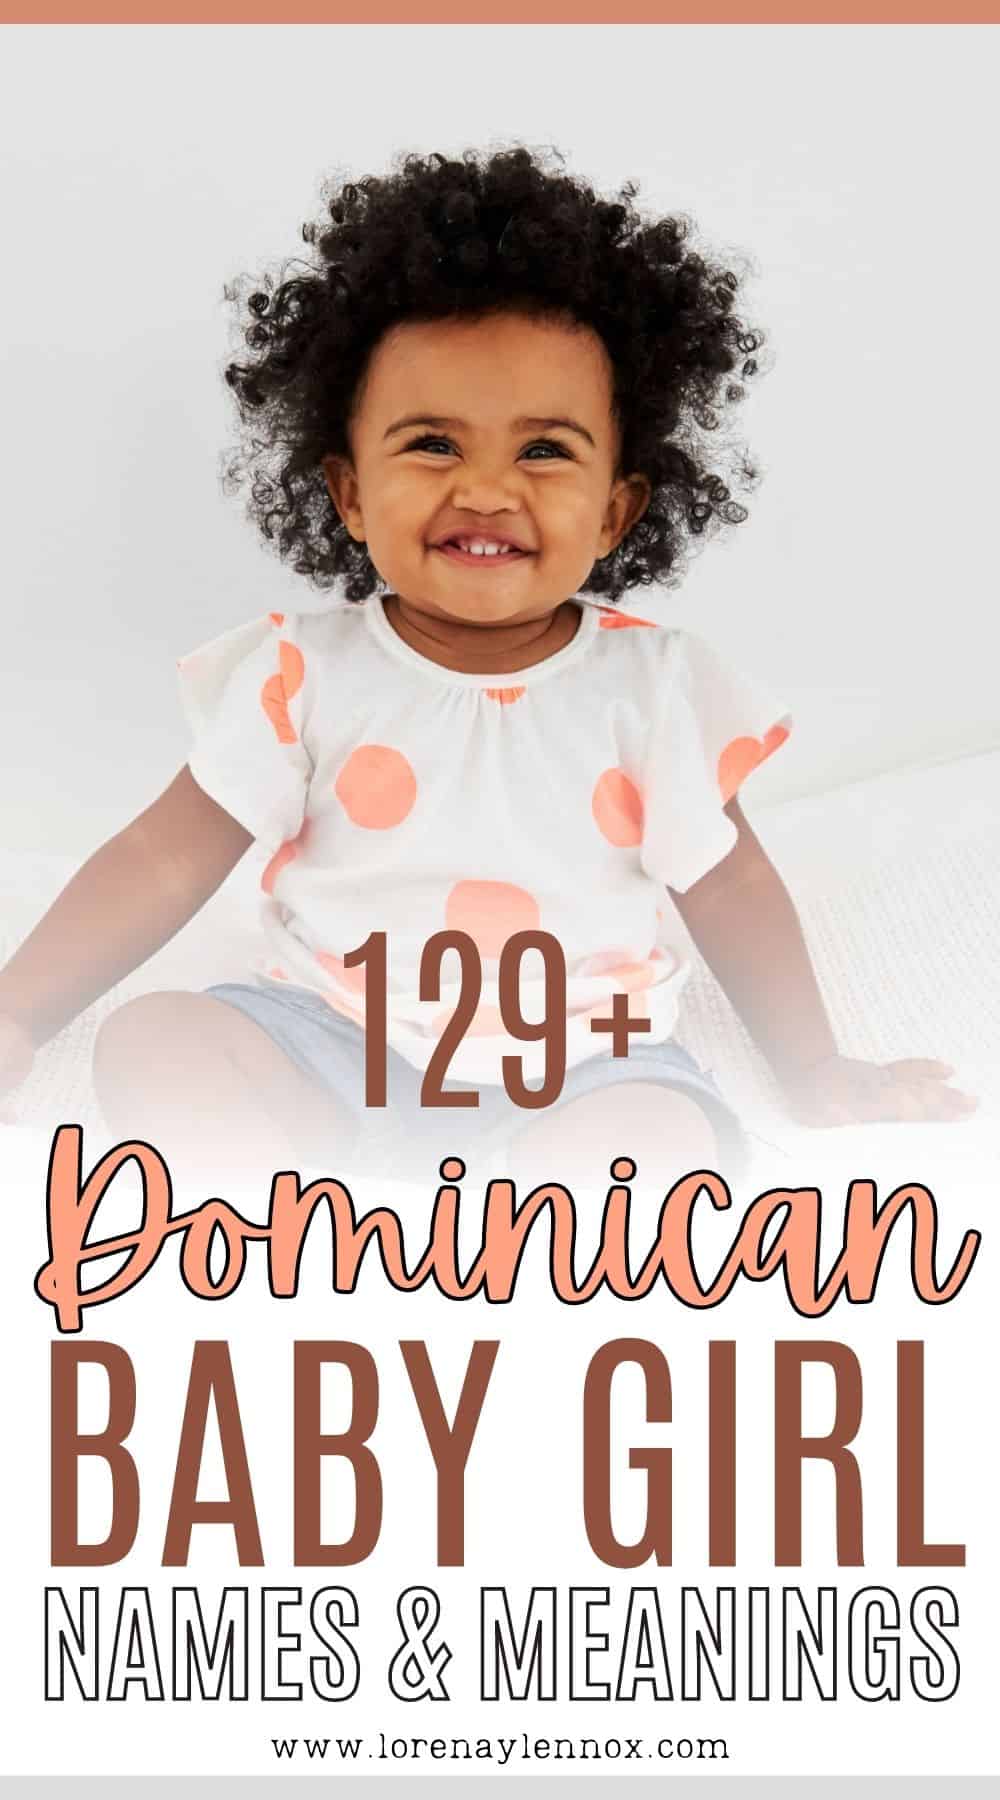 Discover the charm of 129+ adorable Dominican baby girl names, each capturing the essence of Dominican culture and traditions. From timeless classics to endearing modern choices, this collection is a treasure trove of names perfect for your little princess. Embrace the cultural richness of the Dominican Republic with these cute and meaningful names, sure to make your baby girl's identity even more special. 🌺👶 #DominicanBabyNames #BabyGirlNames #DominicanHeritage #CuteNames #BabyNames #UniqueNames #NamingBaby #NameInspiration #BabyNaming #Bebé #NombresDeNiña #DominicanCulture